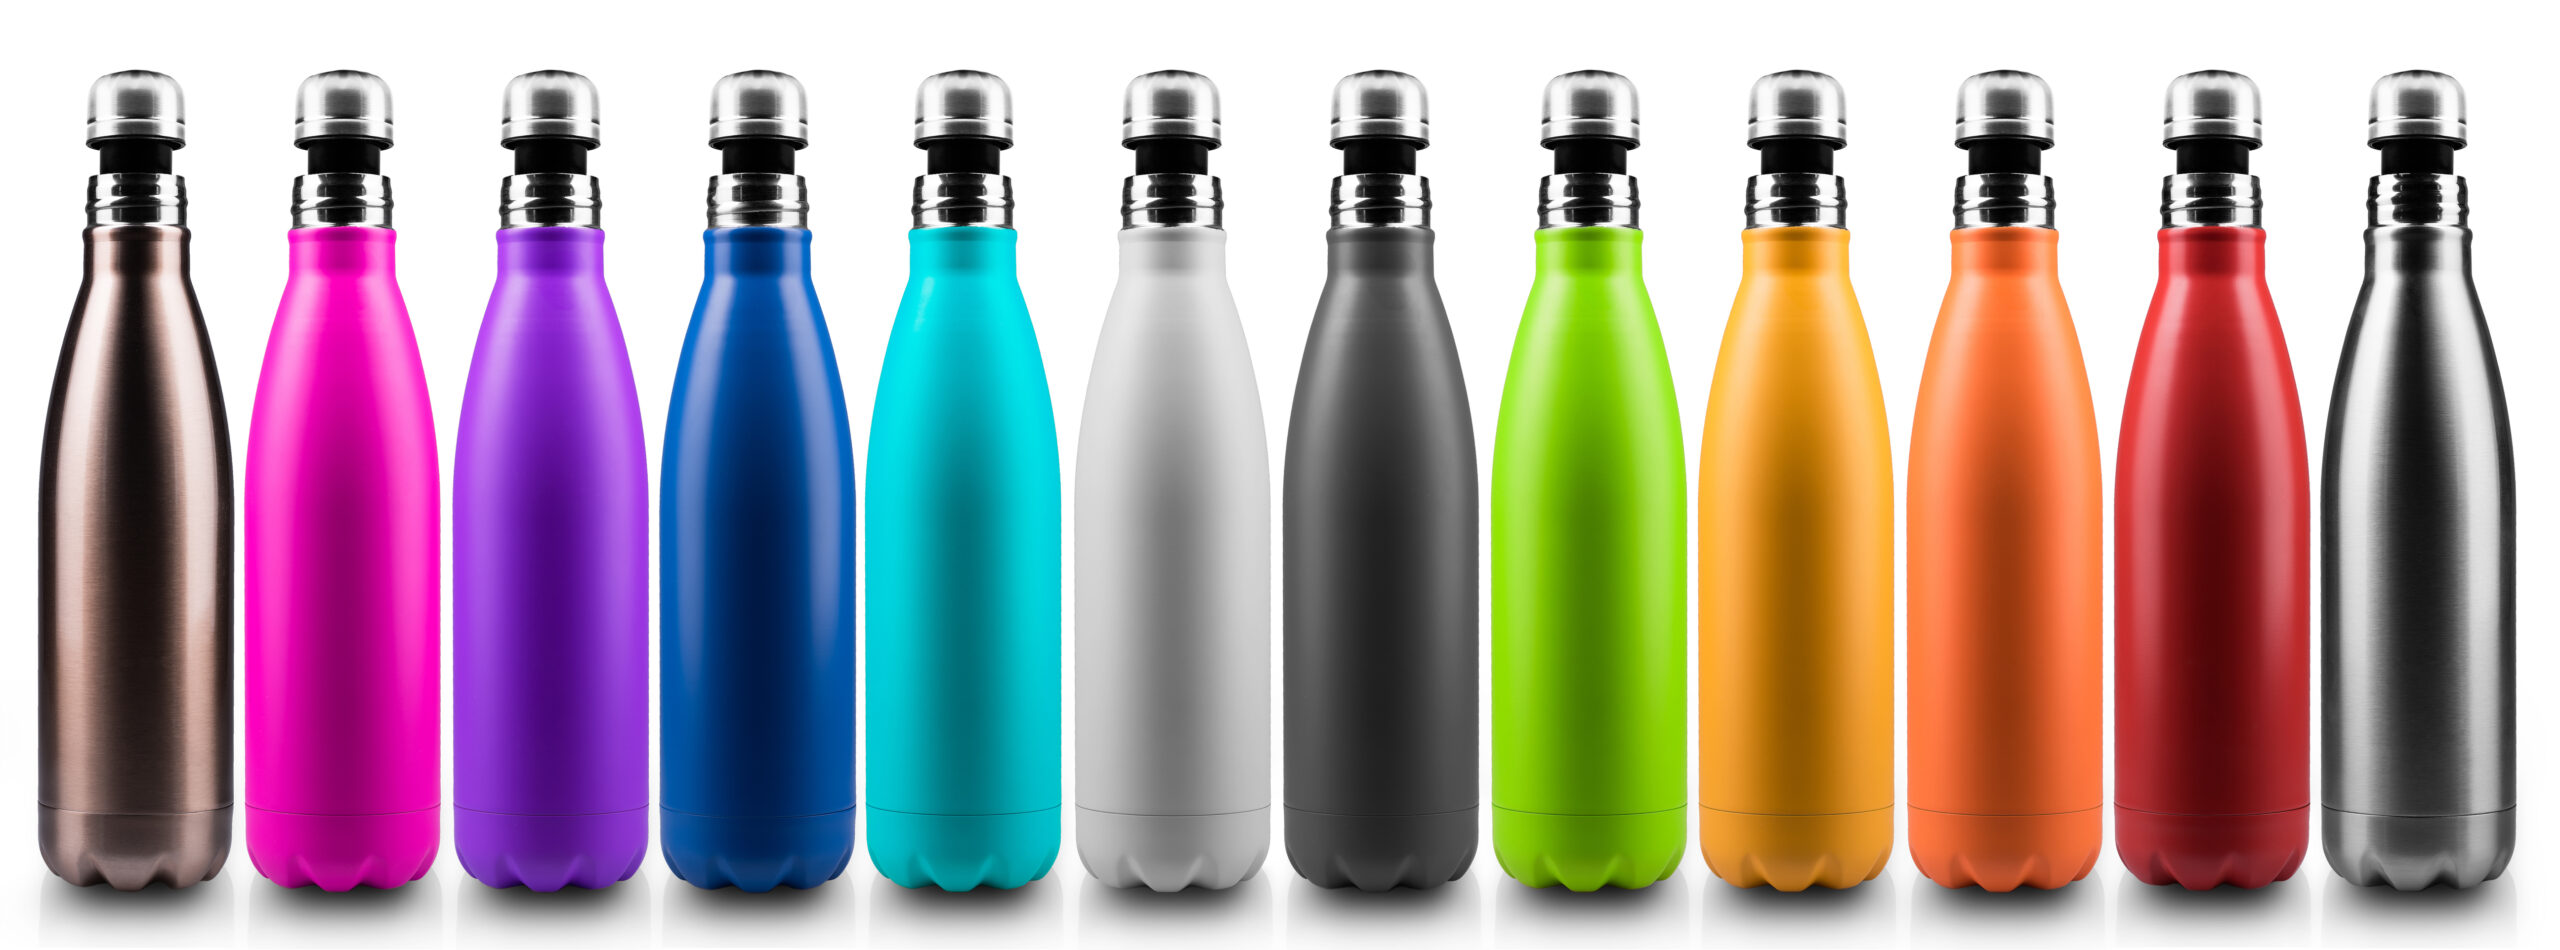 Row of multi-colored water bottles symbolizing trade show "swag"